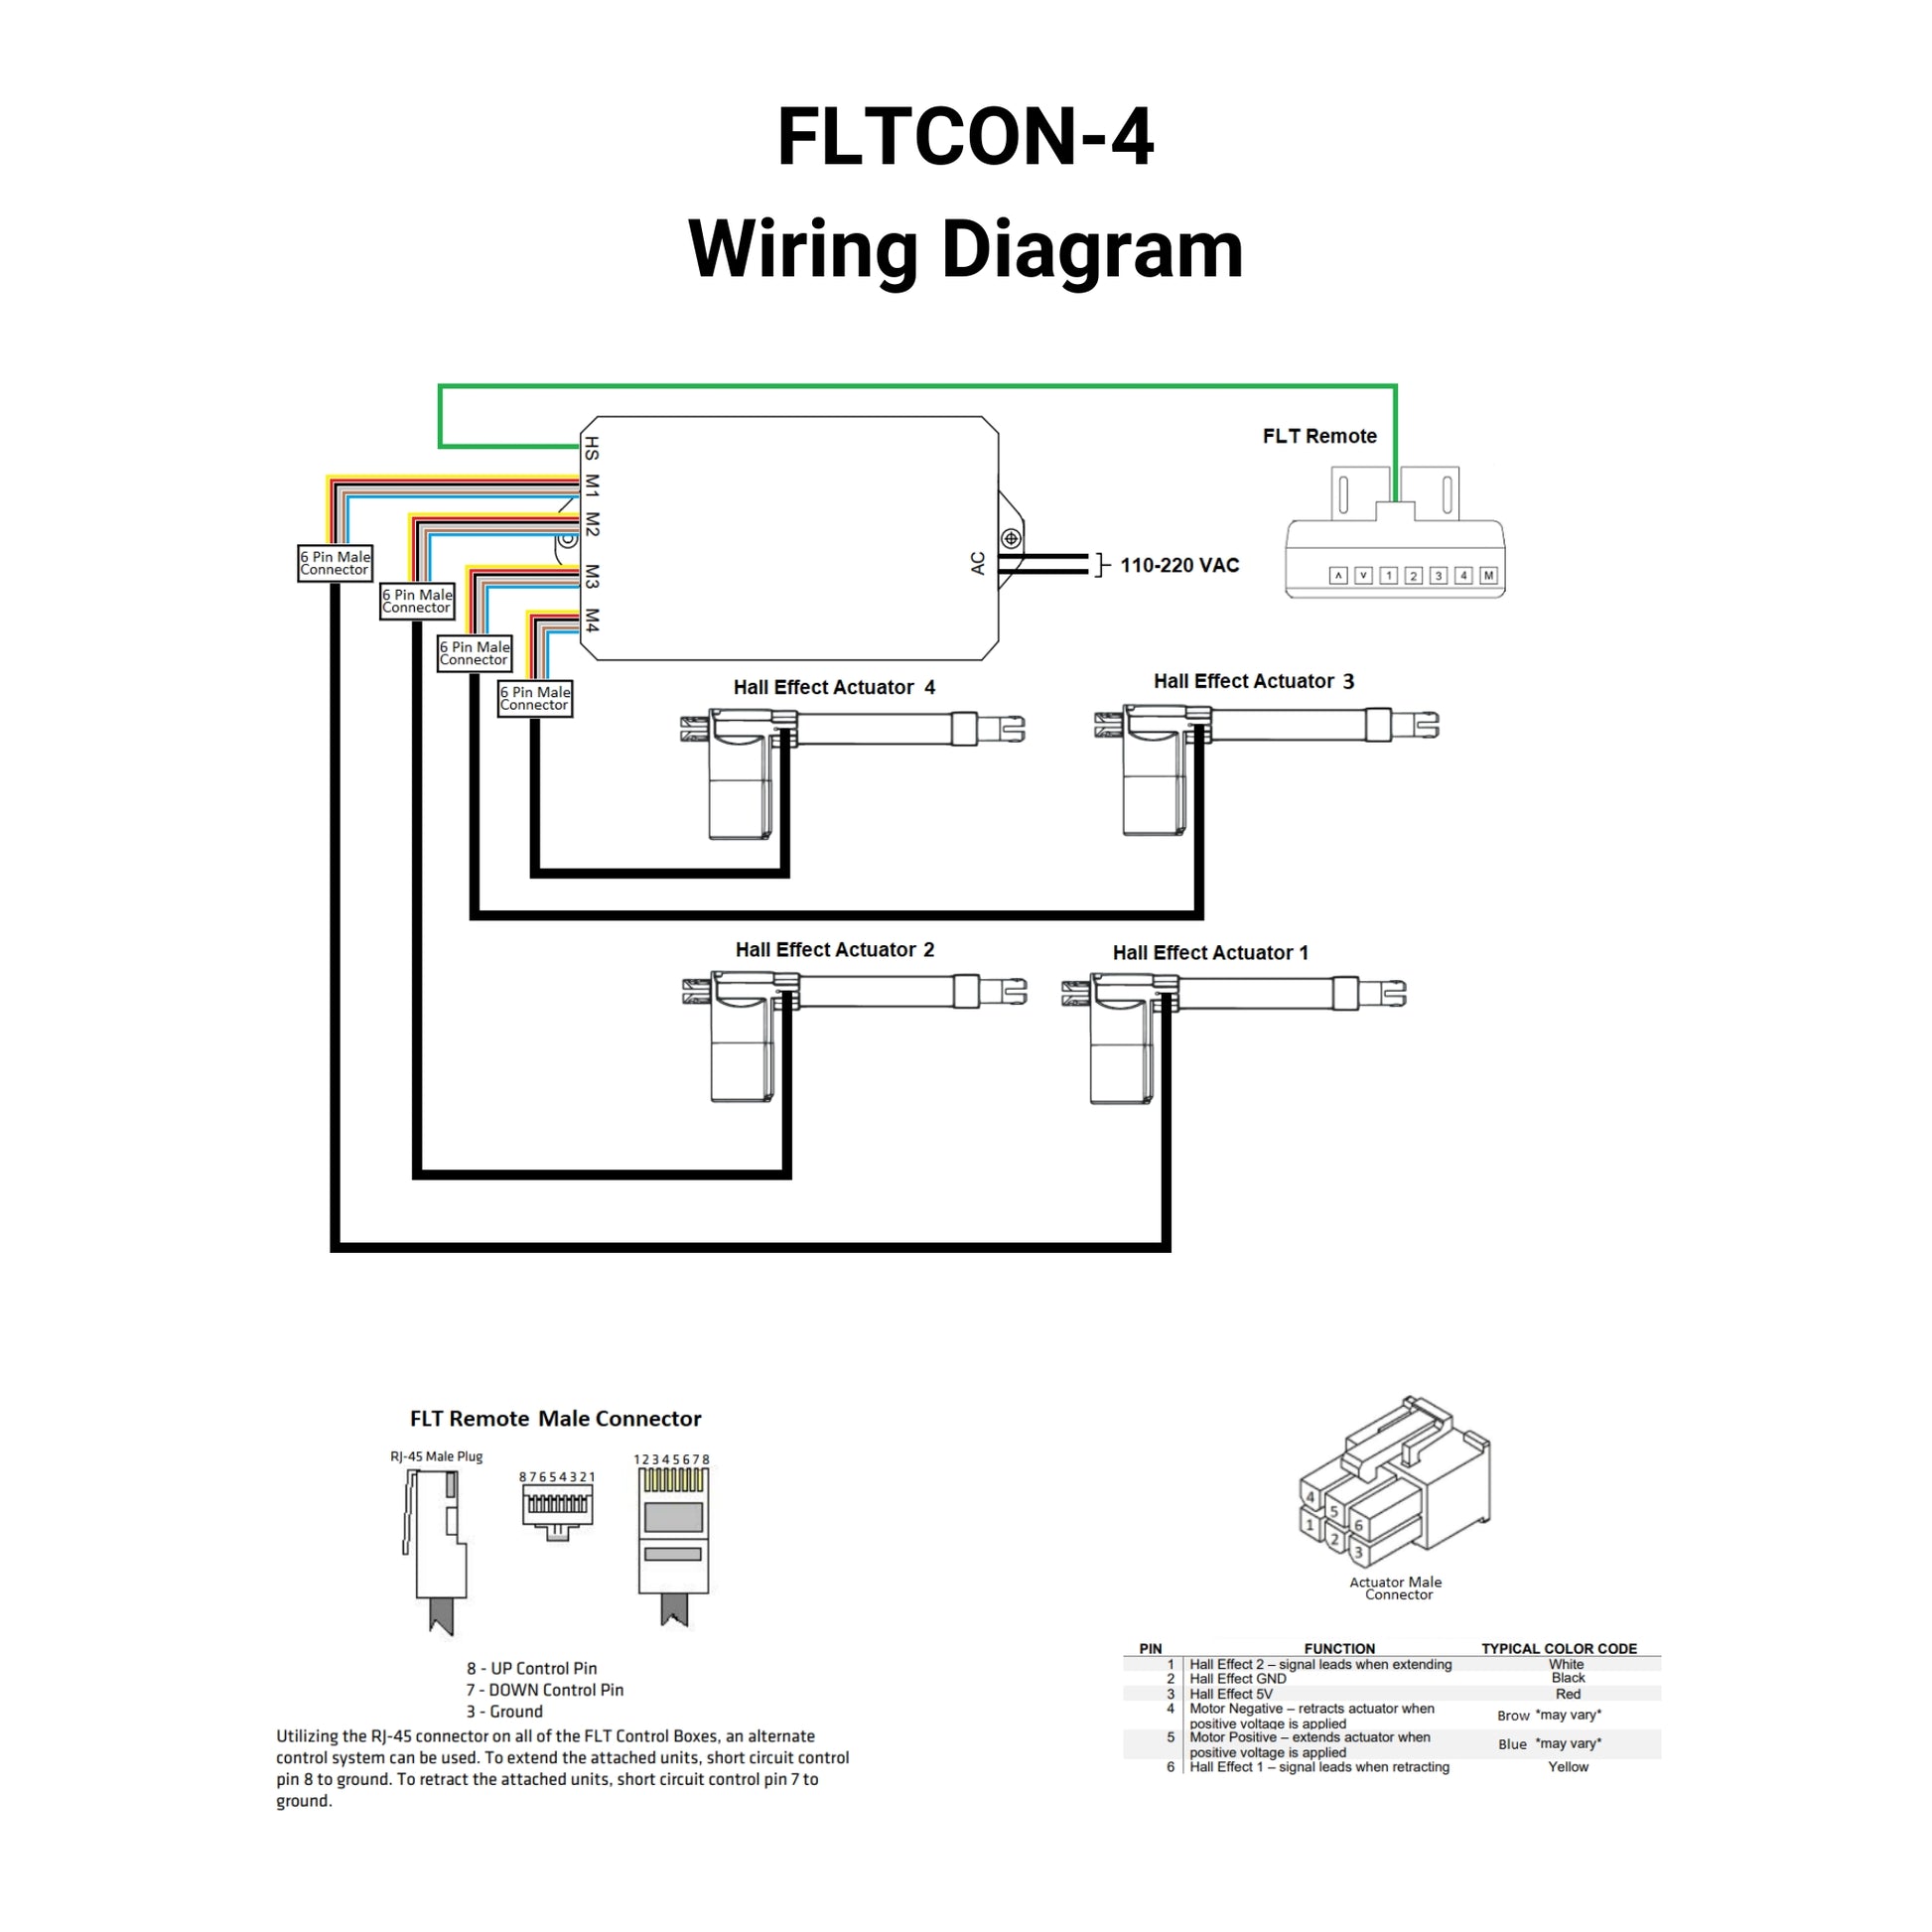 110 VAC - 24 VDC - 4-Sync Hall Effect Control Box with Presets Wiring Diagram